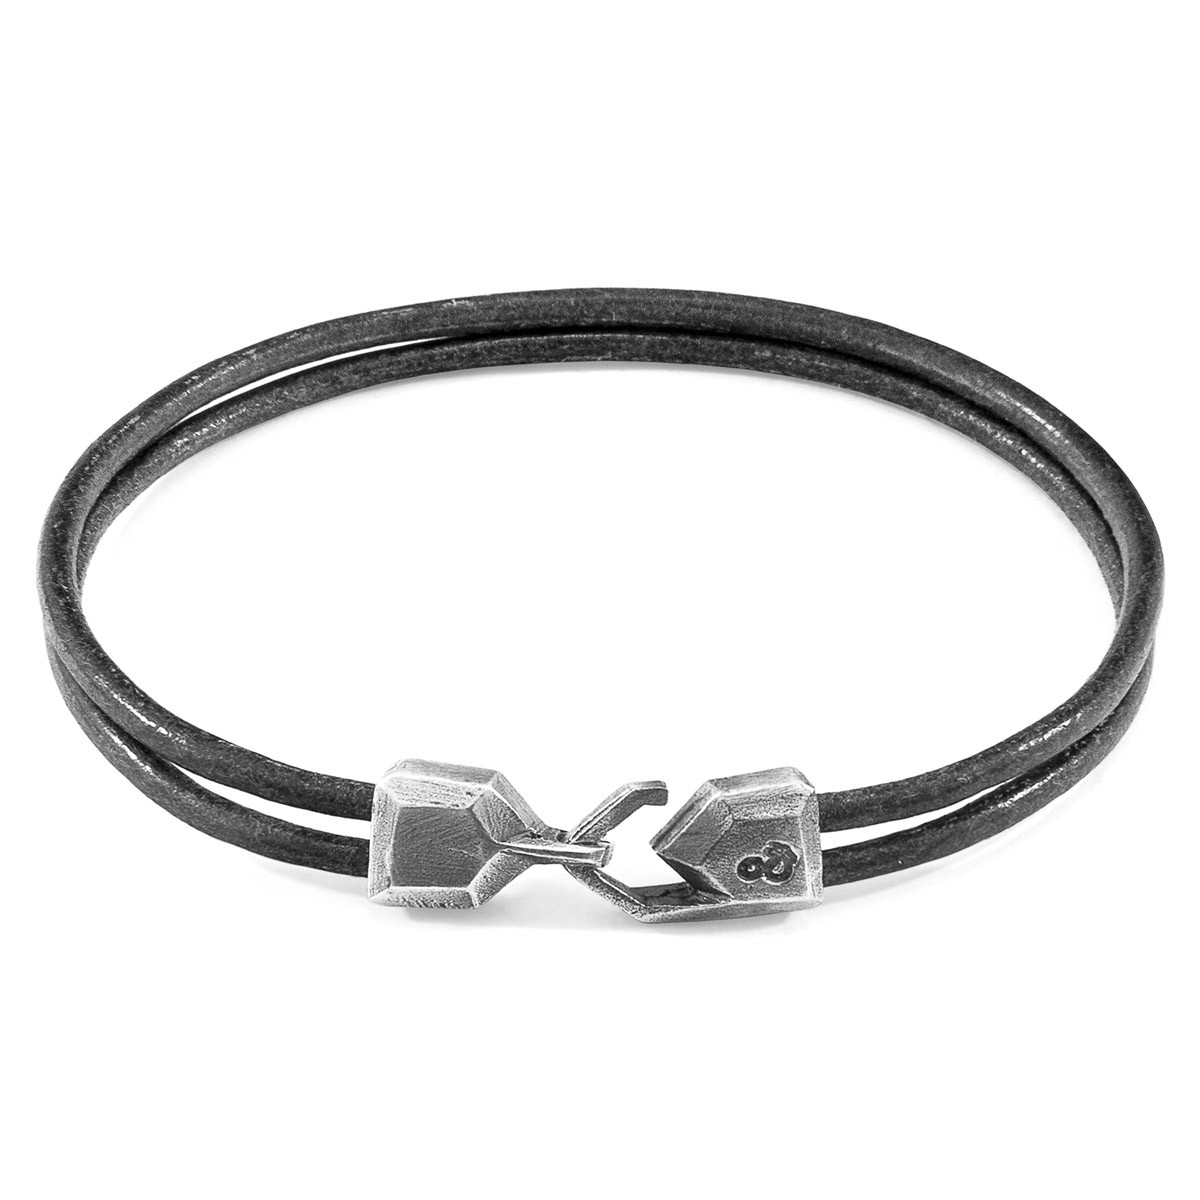 Shadow Grey Cromer Silver and Round Leather Bracelet